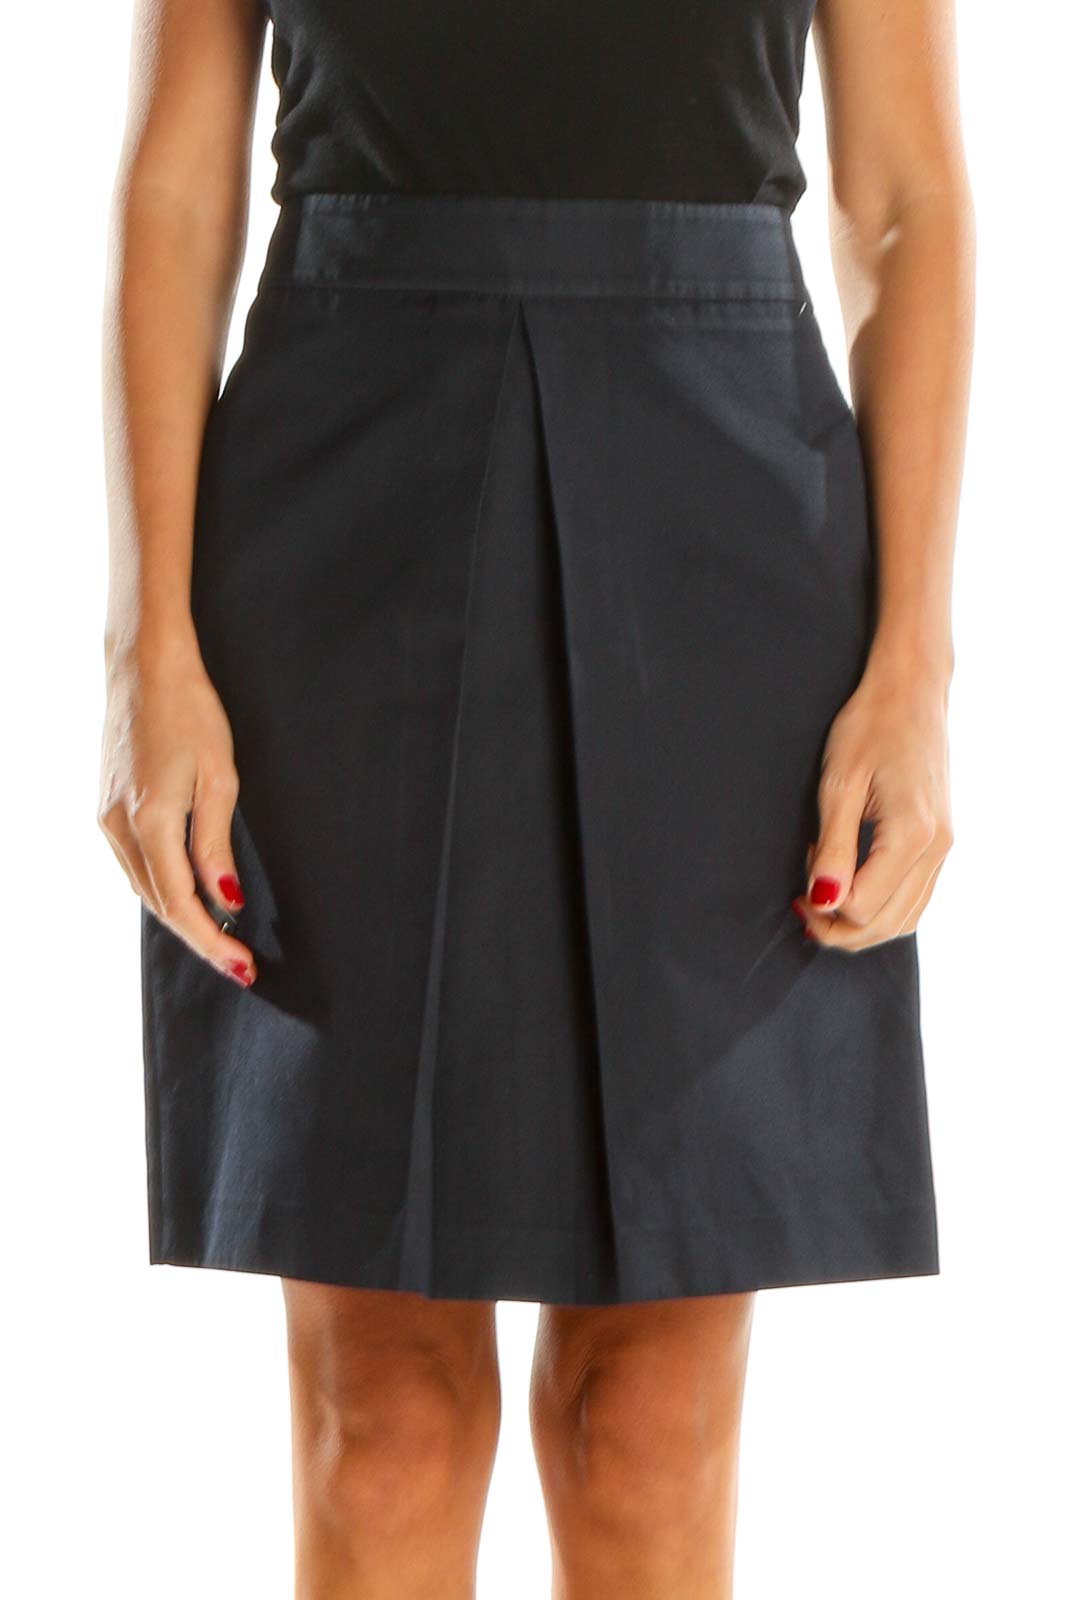 Blue Solid Classic A-Line Skirt Front